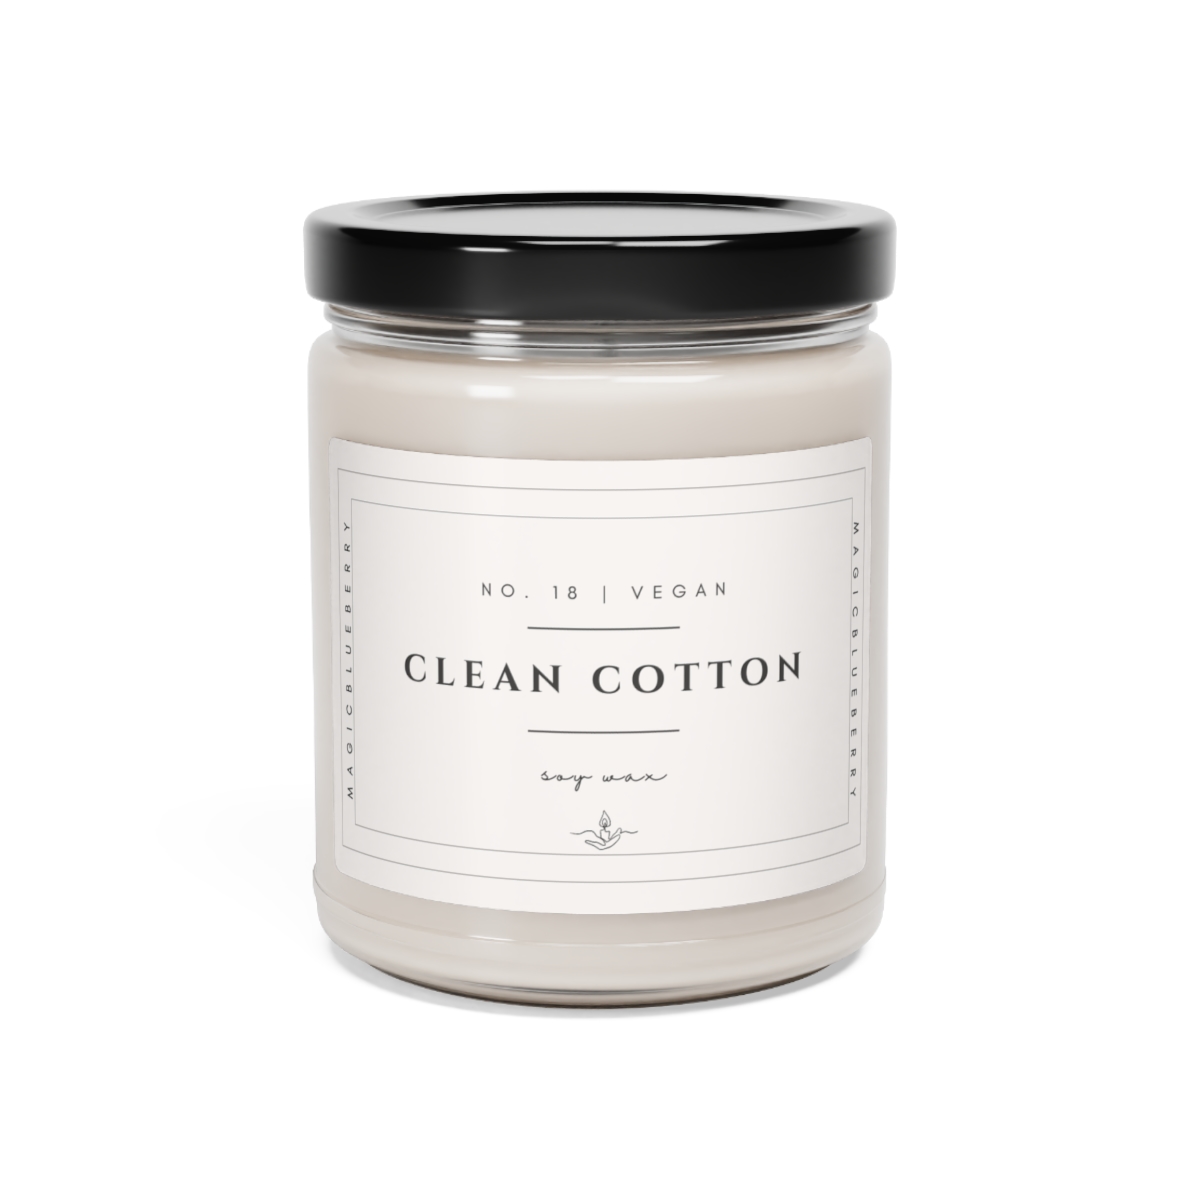 Clean Cotton Scented Vegan Soy Wax Candle Clear Jar Candle, Spell Candle, Sassy Candle Vegan Candle Cotton Wick Candle Home Deco product thumbnail image